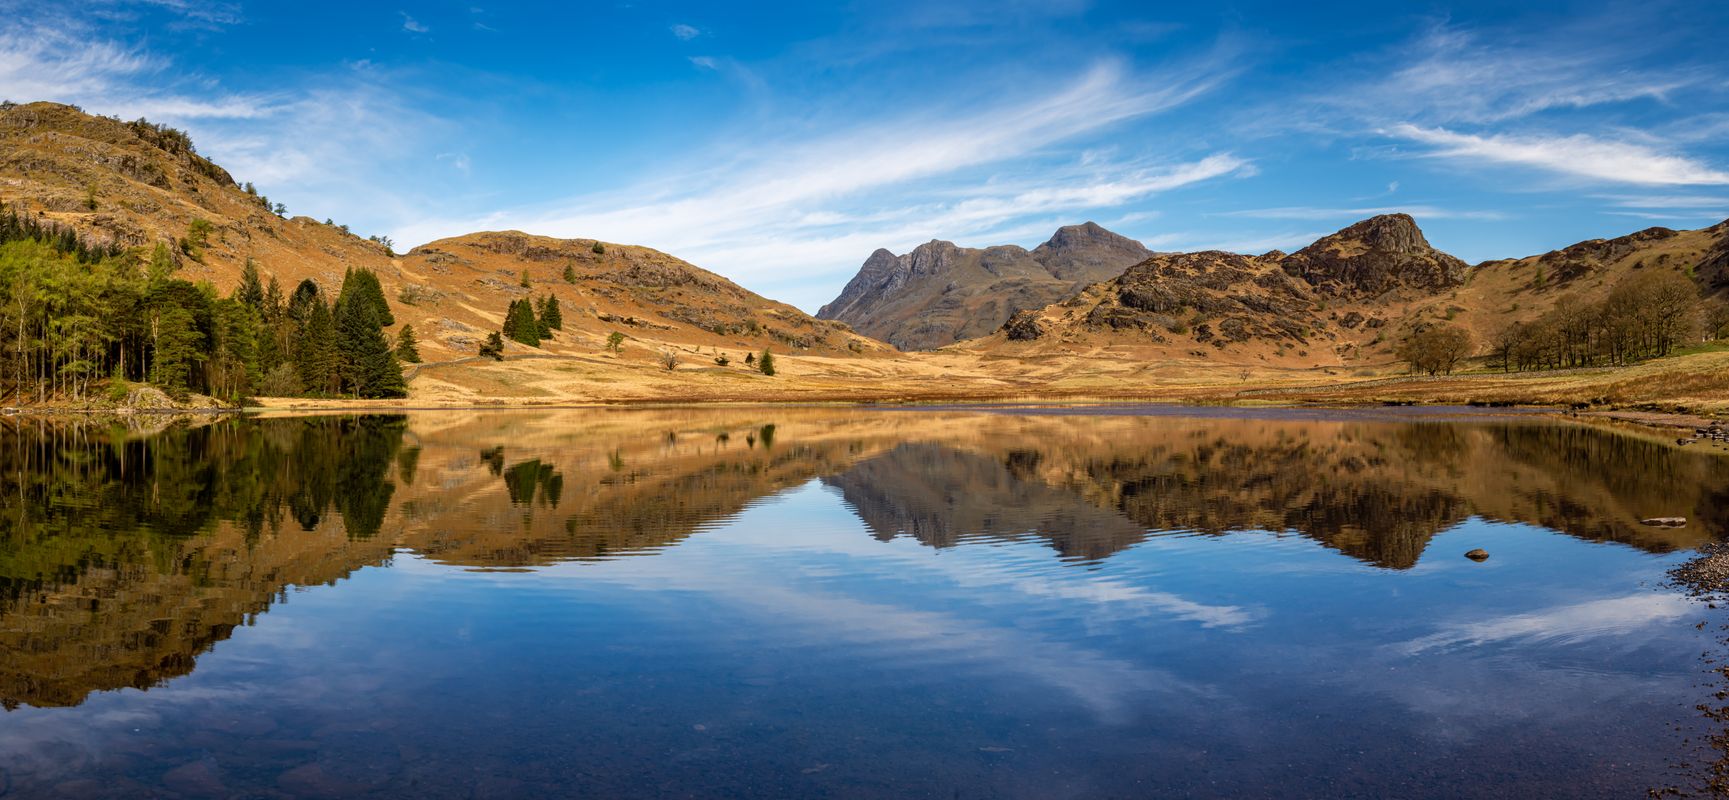 Blea tarn reflections in the lake district Cumbria